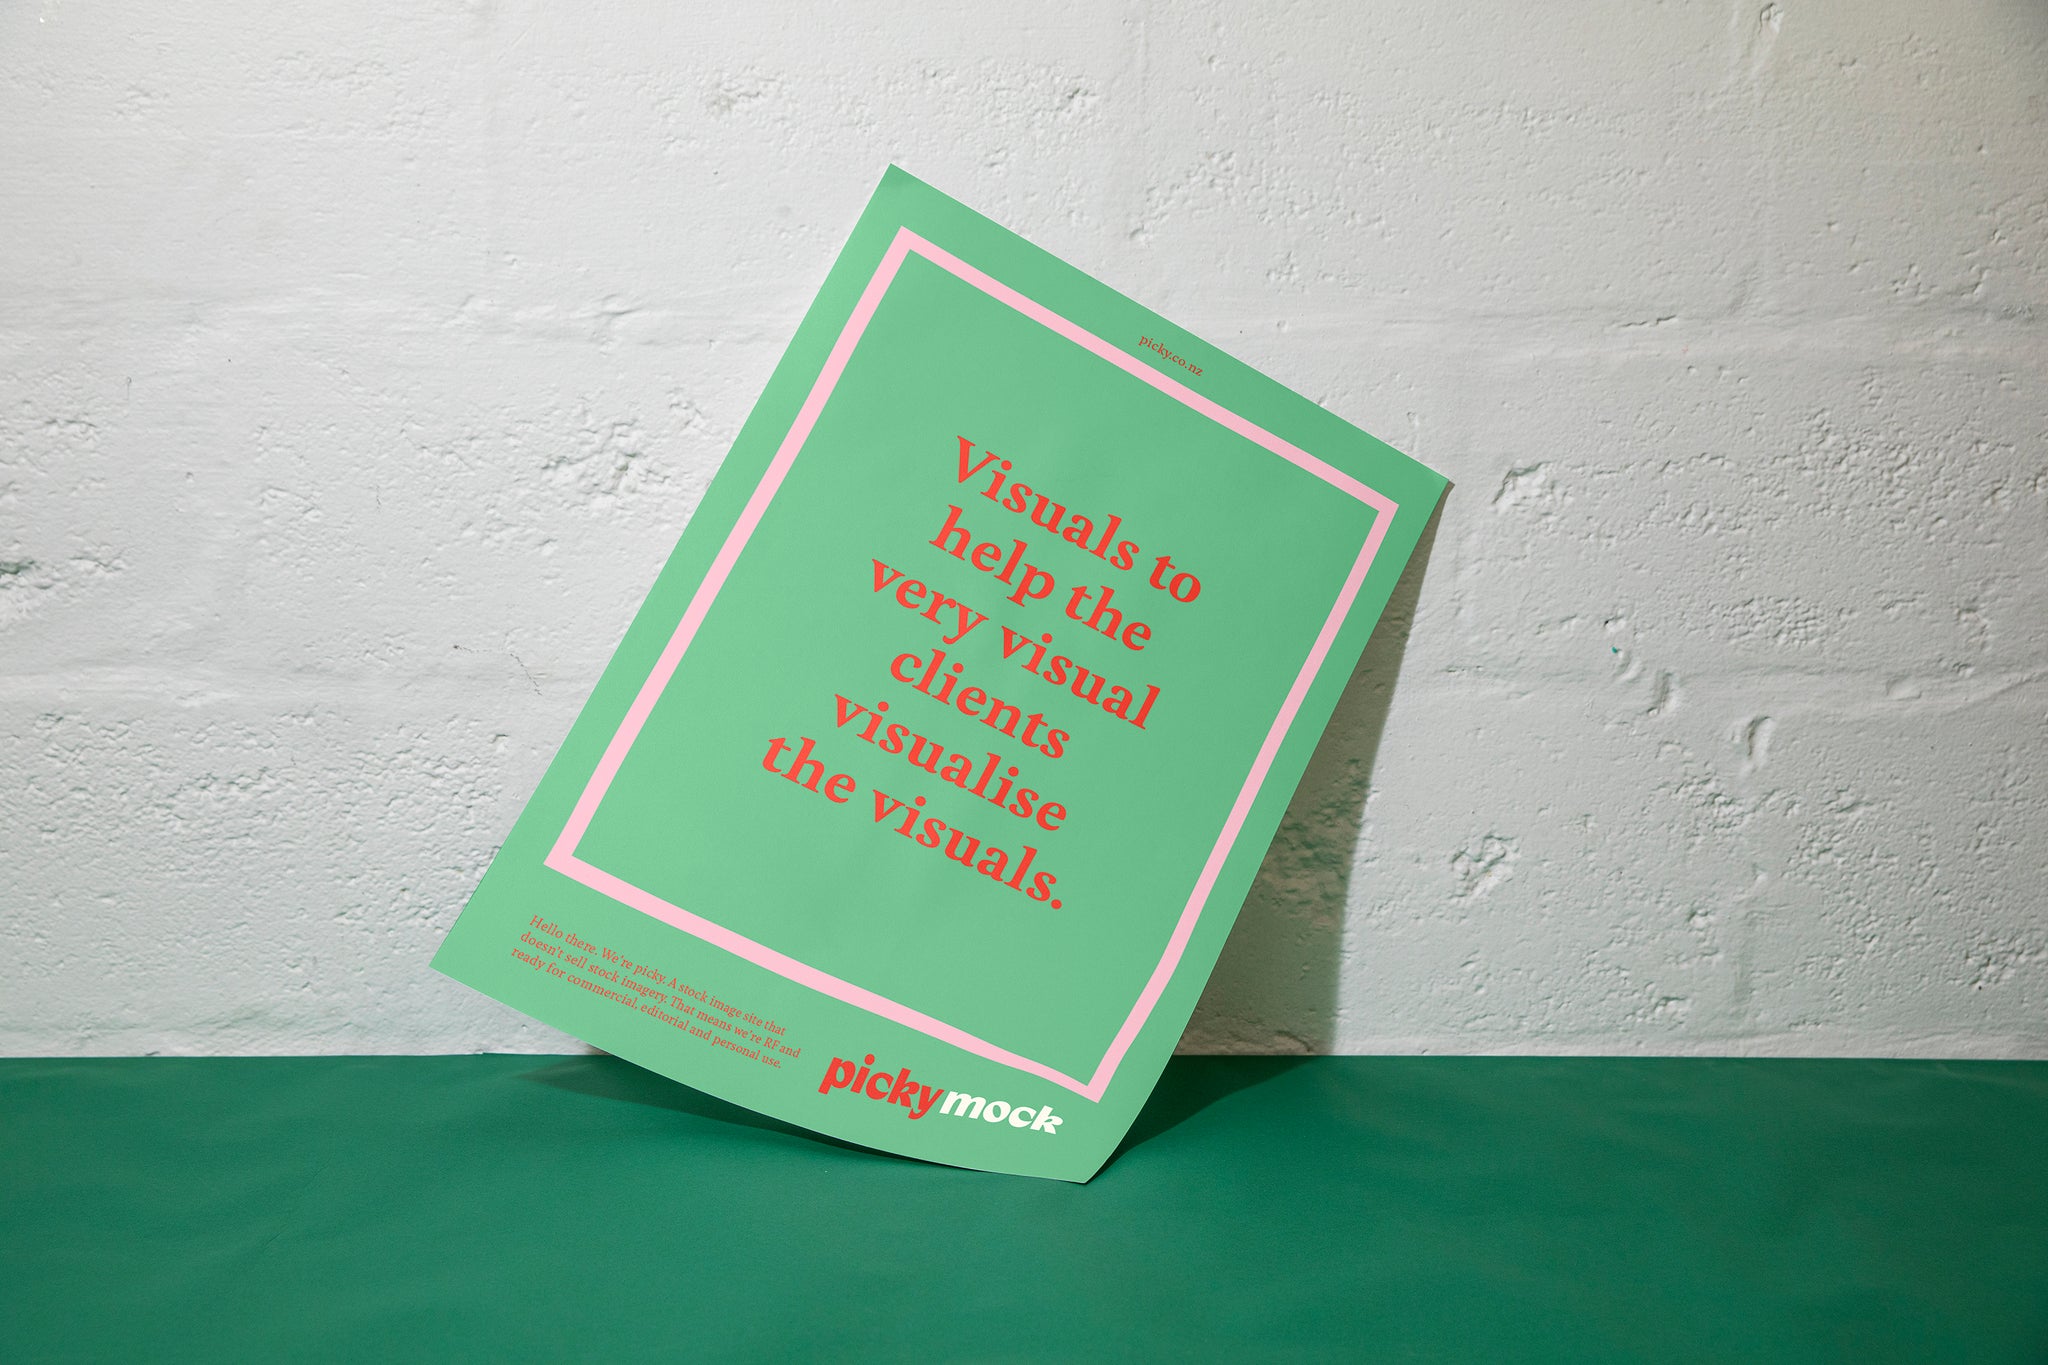 A green piece of card is sitting against a white cinder block wall and green surface. The card is green with a quote written in the middle of the frame. 